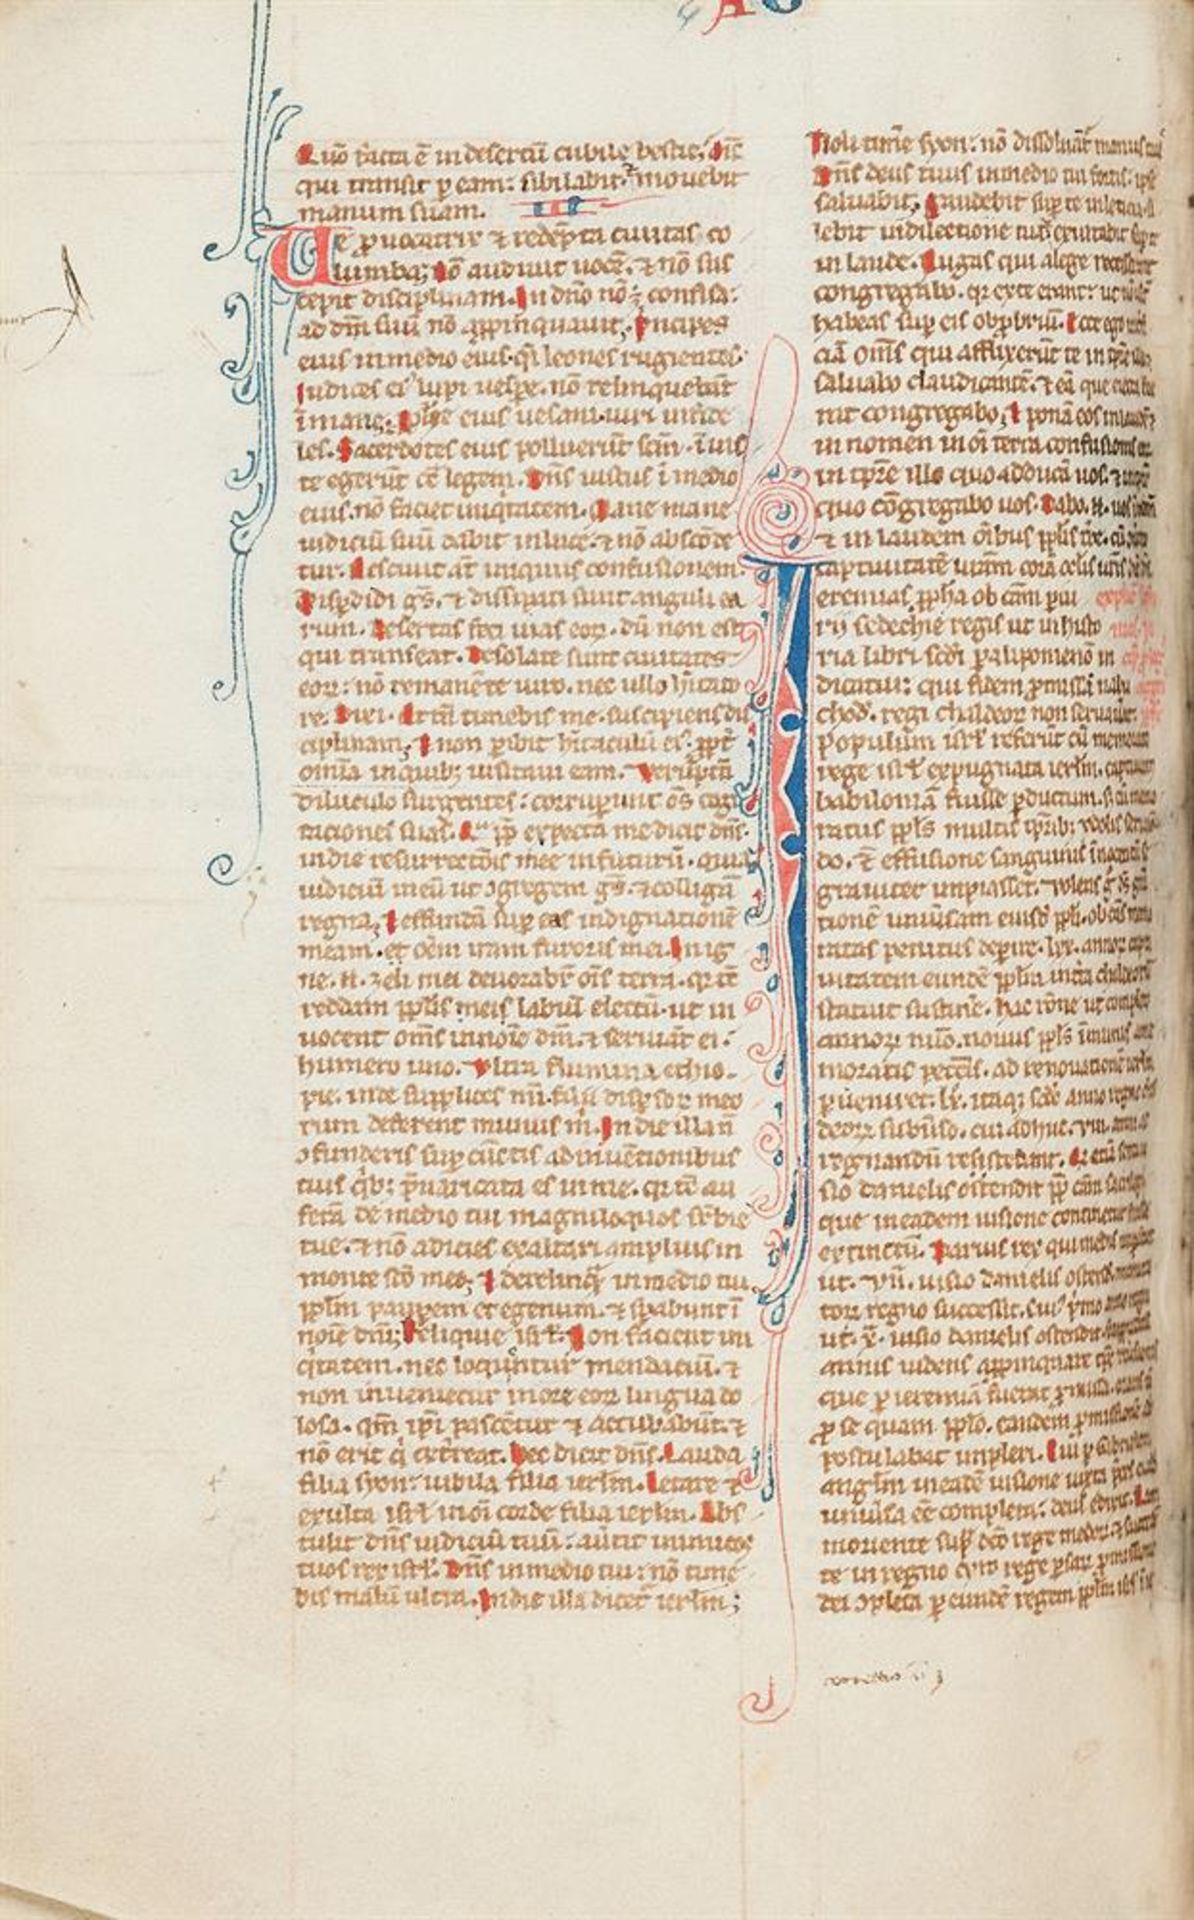 Ɵ The Bishop Carr Bible, in Latin, decorated manuscript on parchment - Image 6 of 10